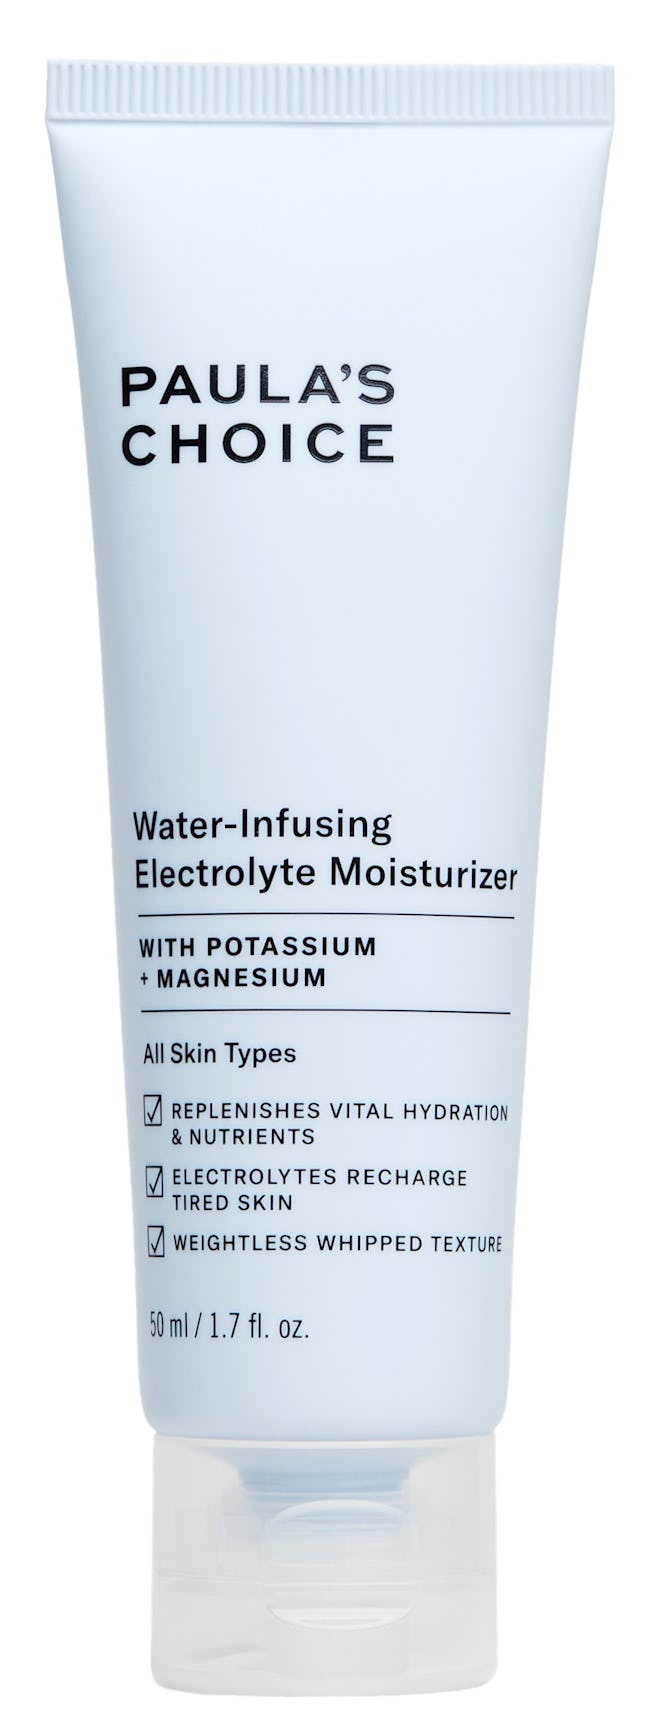 Water-Infused Electrolyte Moisturizer 